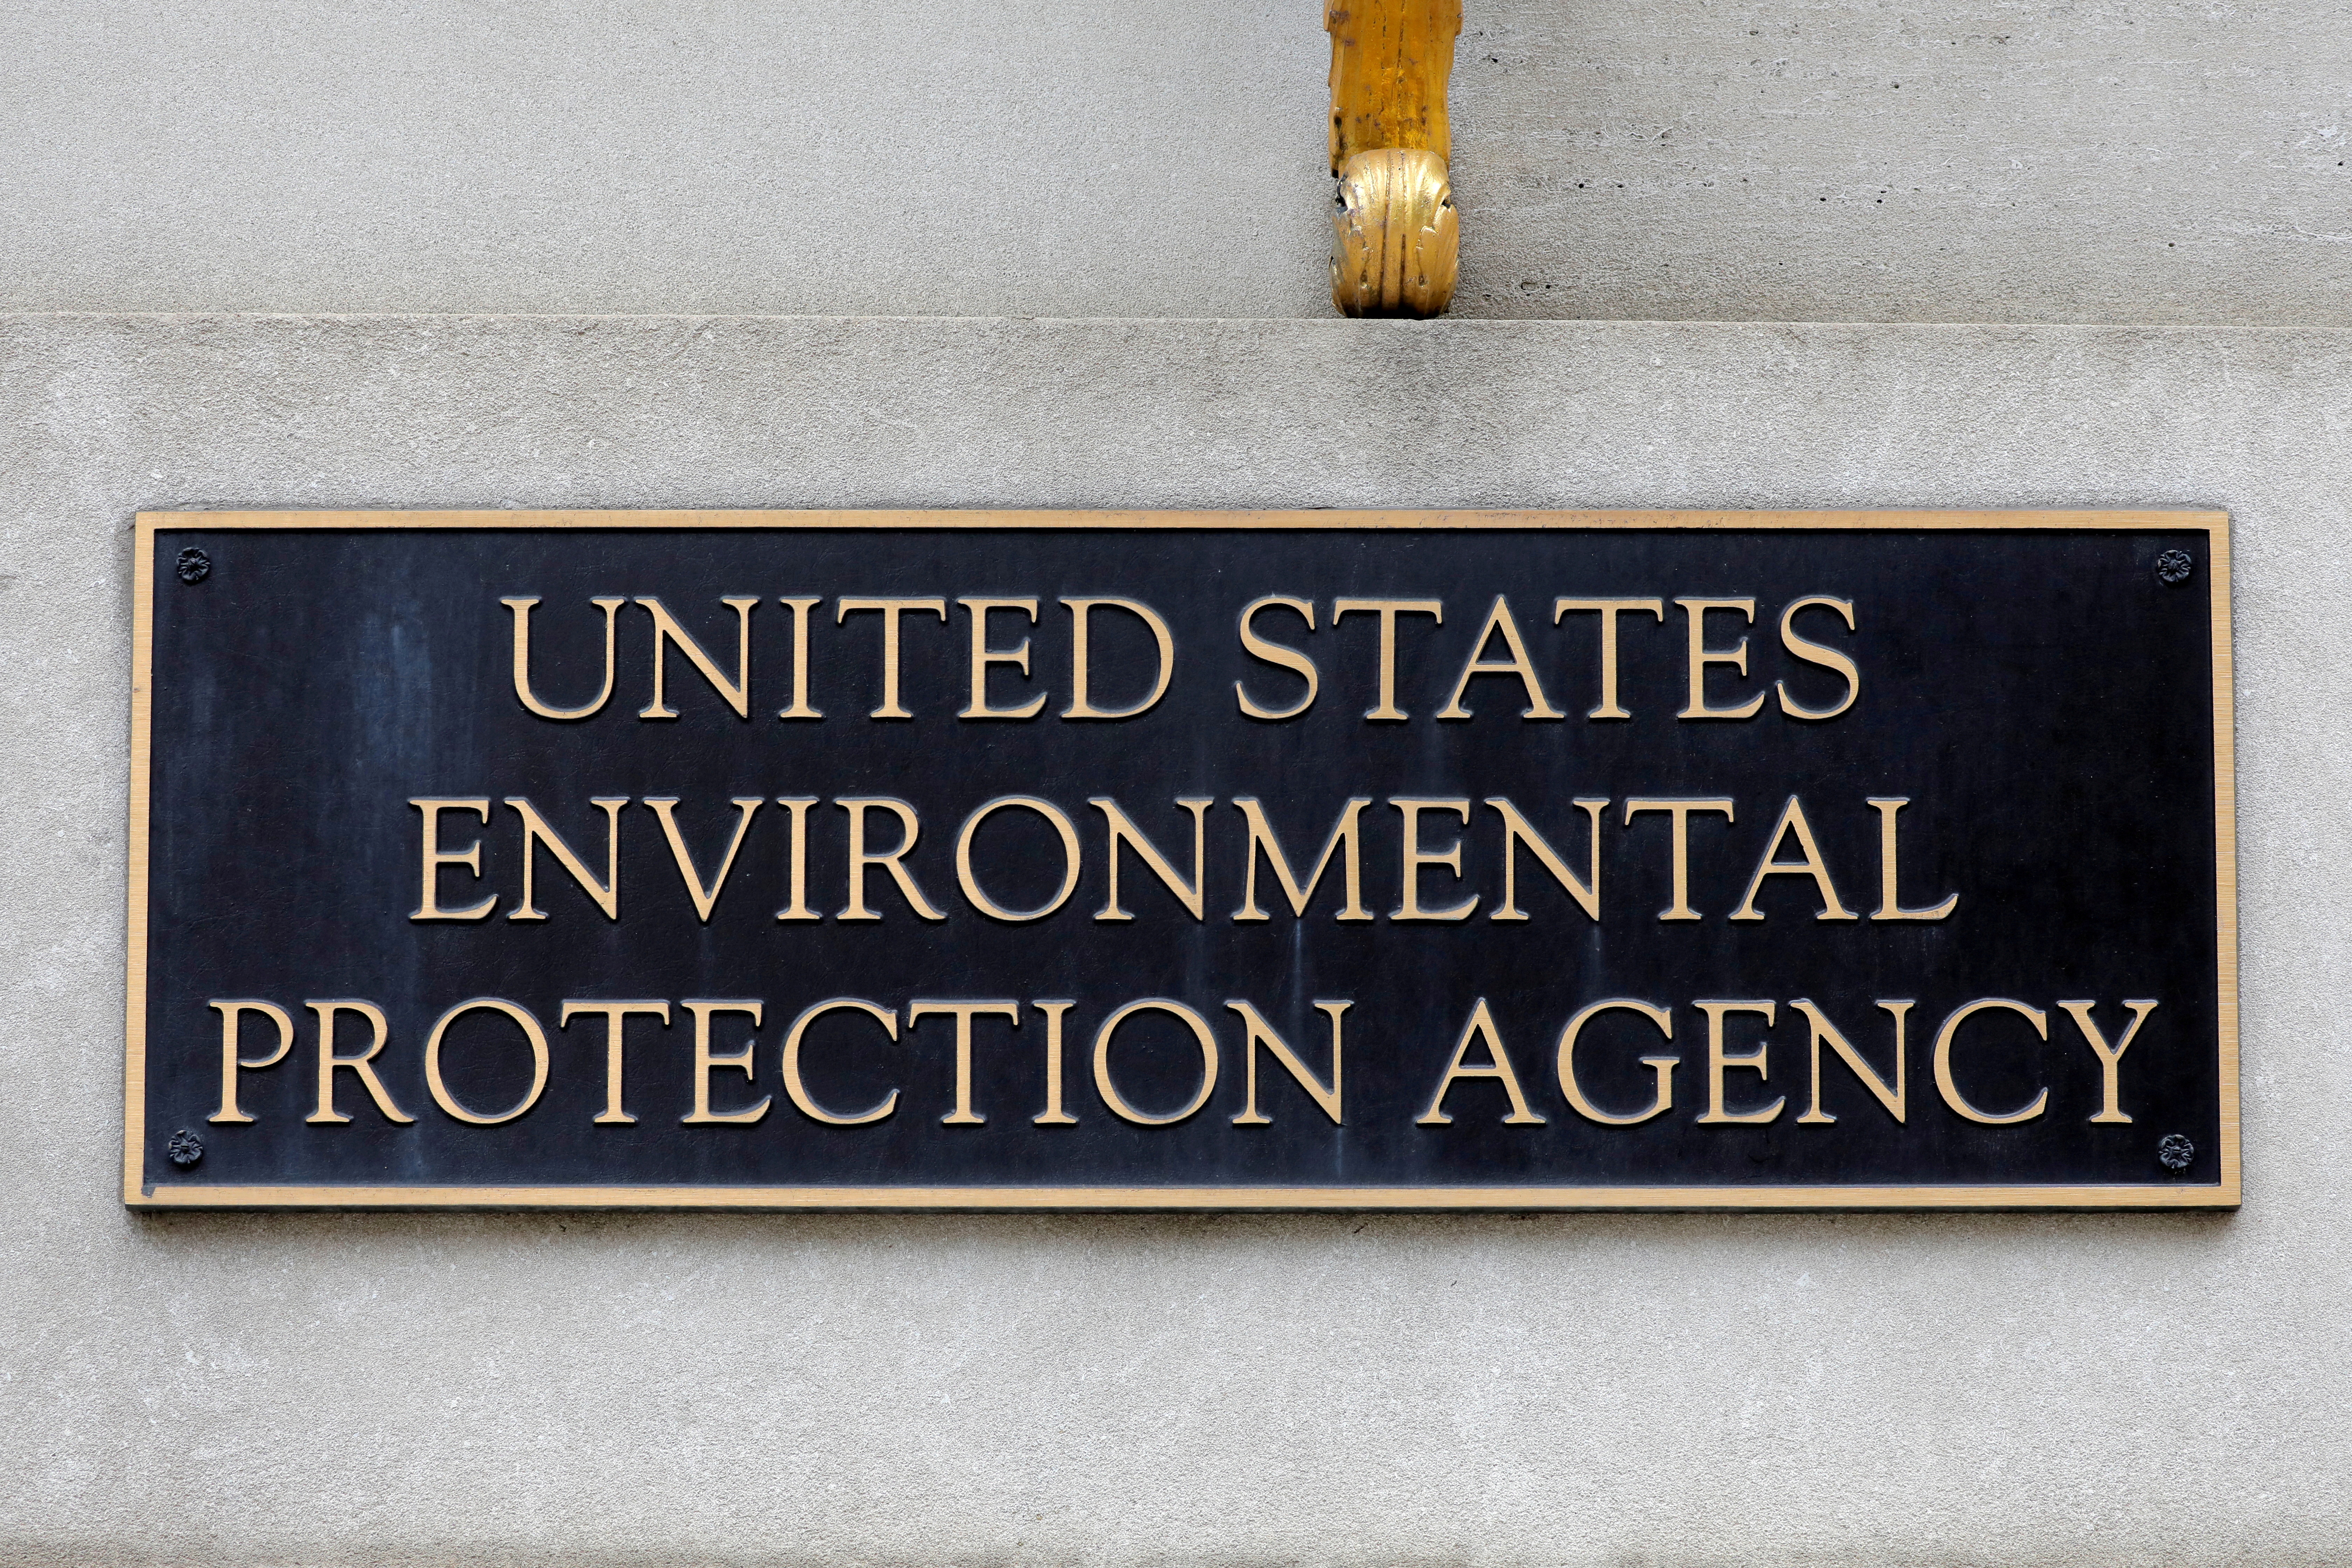 Signage is seen at the headquarters of the United States Environmental Protection Agency (EPA) in Washington, D.C.